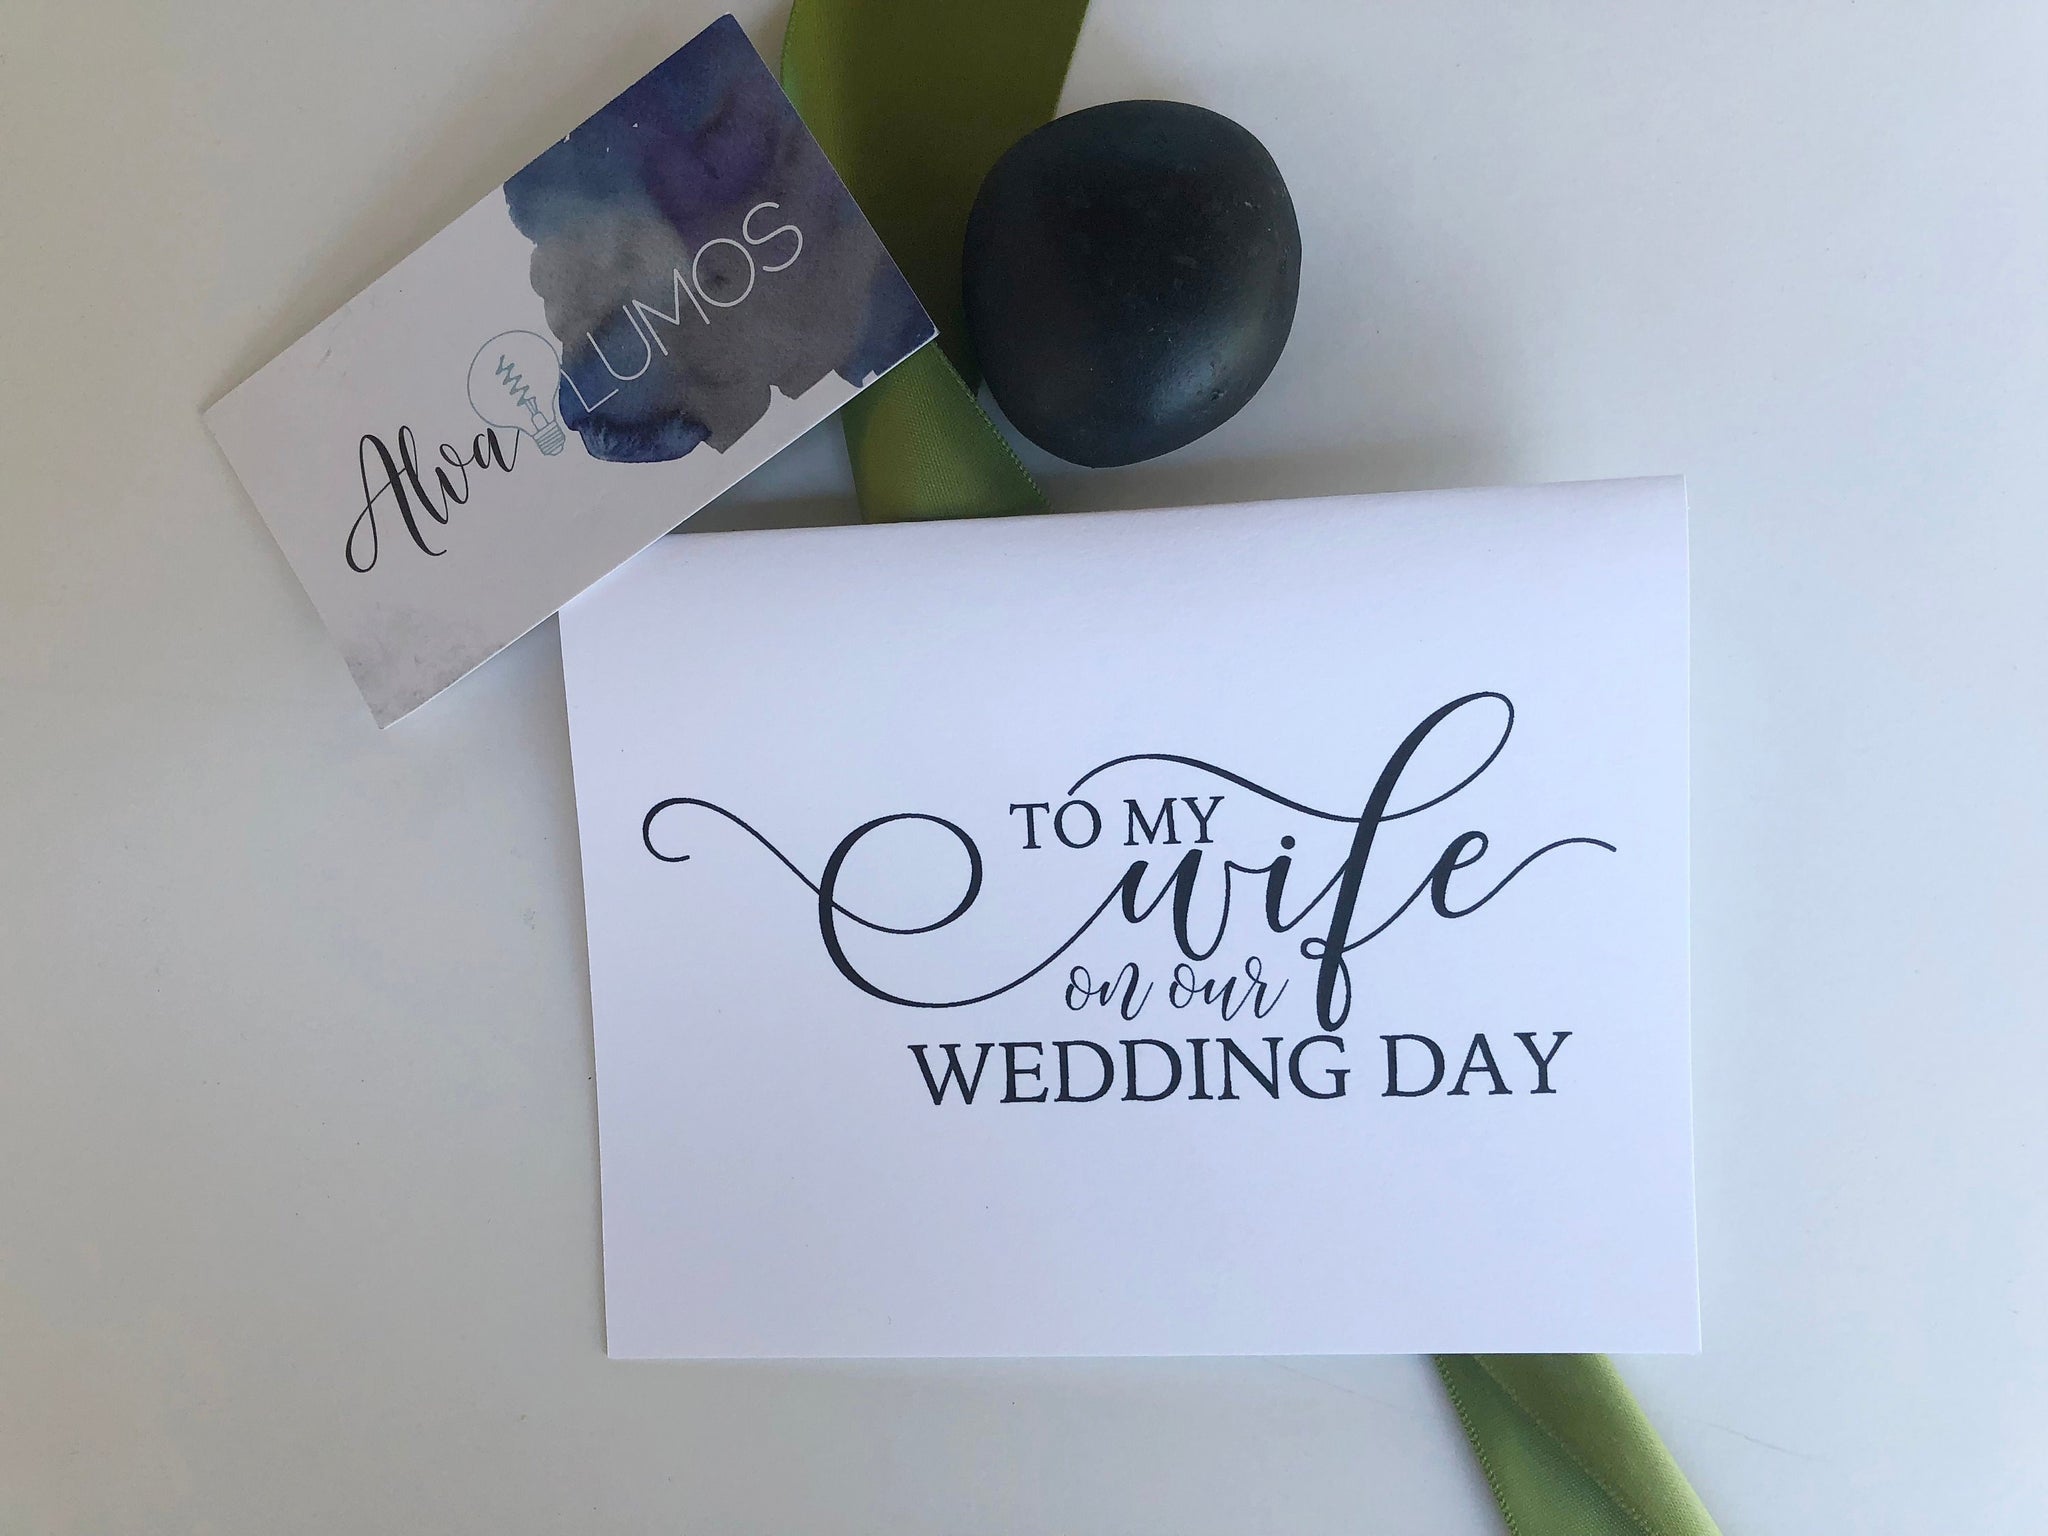 Wedding card to your bride on your wedding day